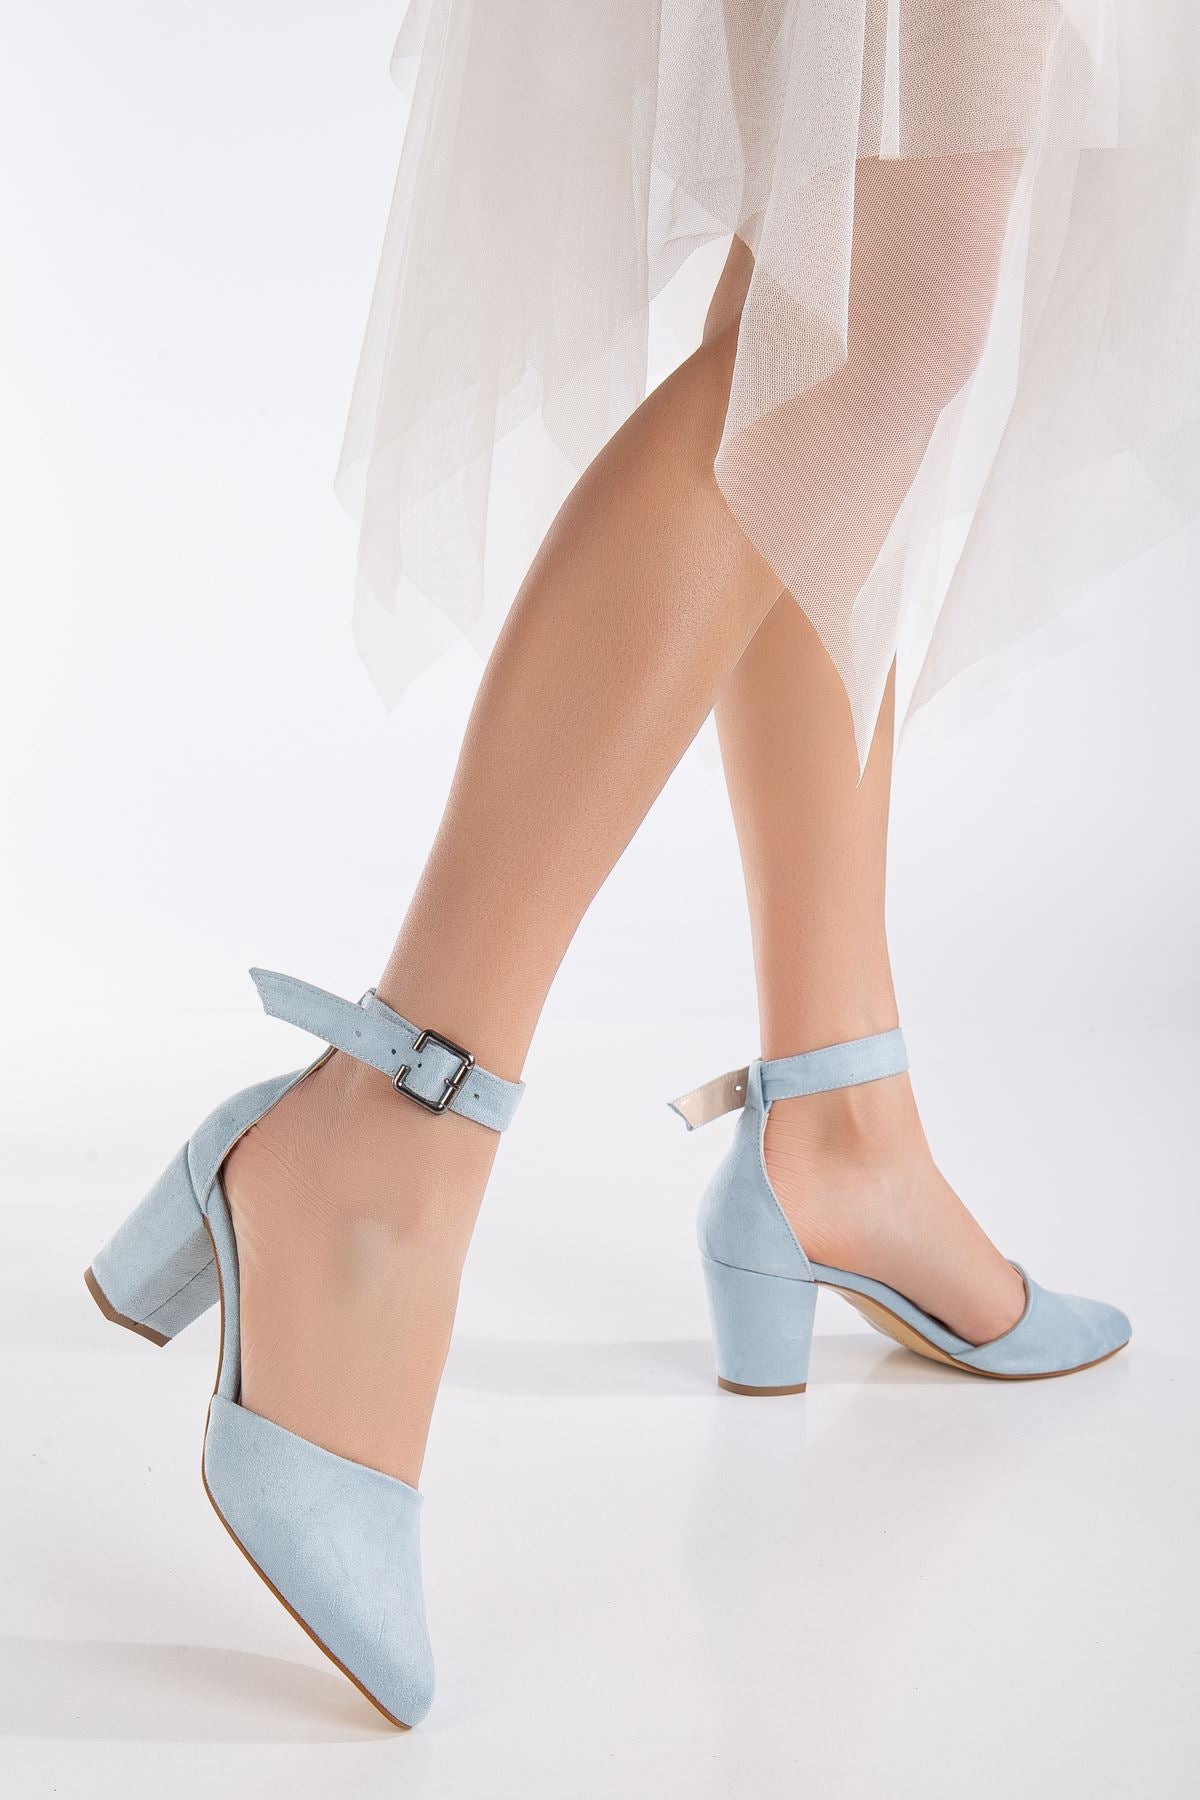 Lottis Baby Blue Suede Detailed Heeled Women's Shoes - STREETMODE™